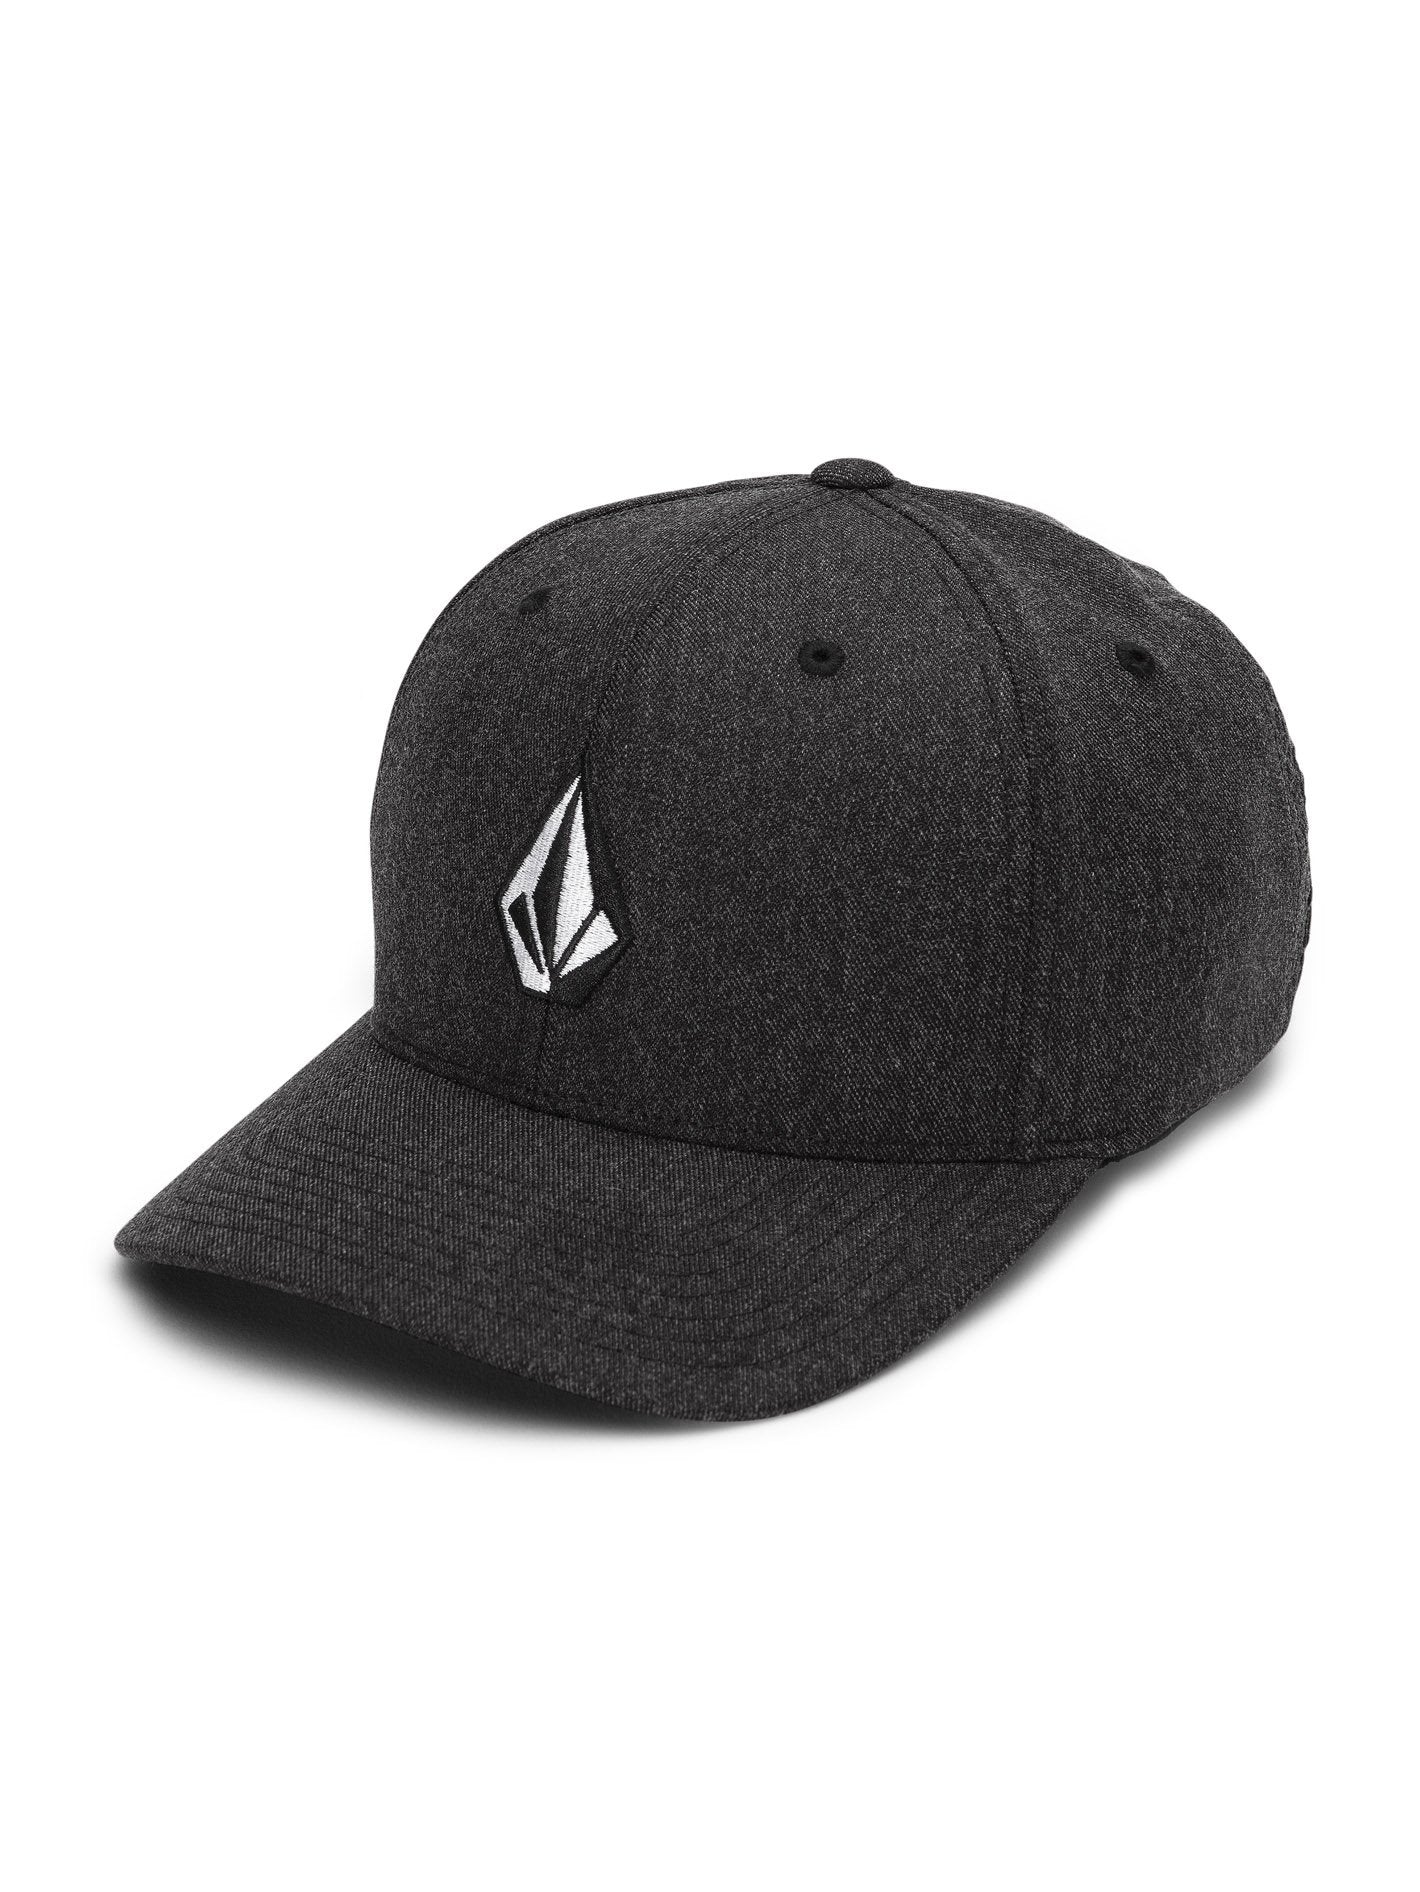 Casquette Full Stone Heather Xfit - Charcoal Heather